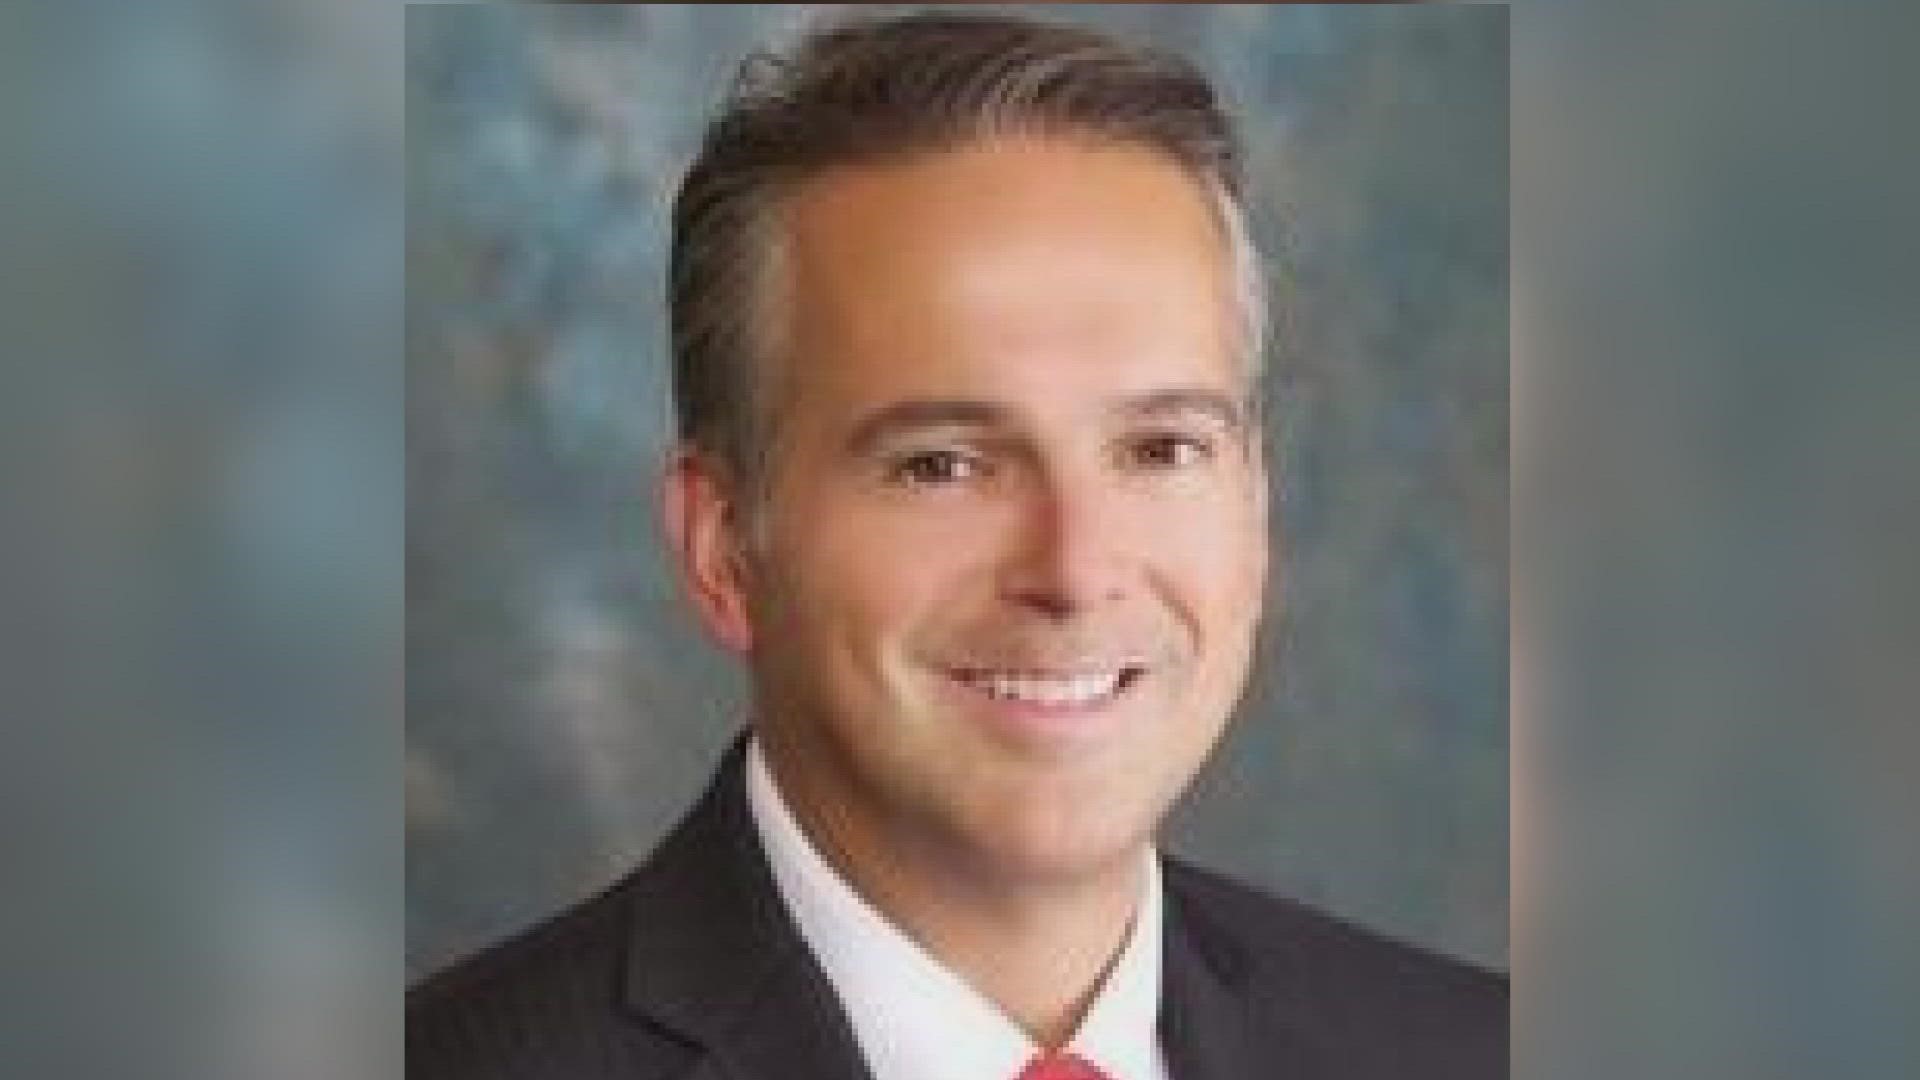 Pablo Vegas replaces Brad Jones, who took over as ERCOT’s interim president and CEO, in May 2021. The prior CEO and president, Bill Magness, was fired in March 2021.